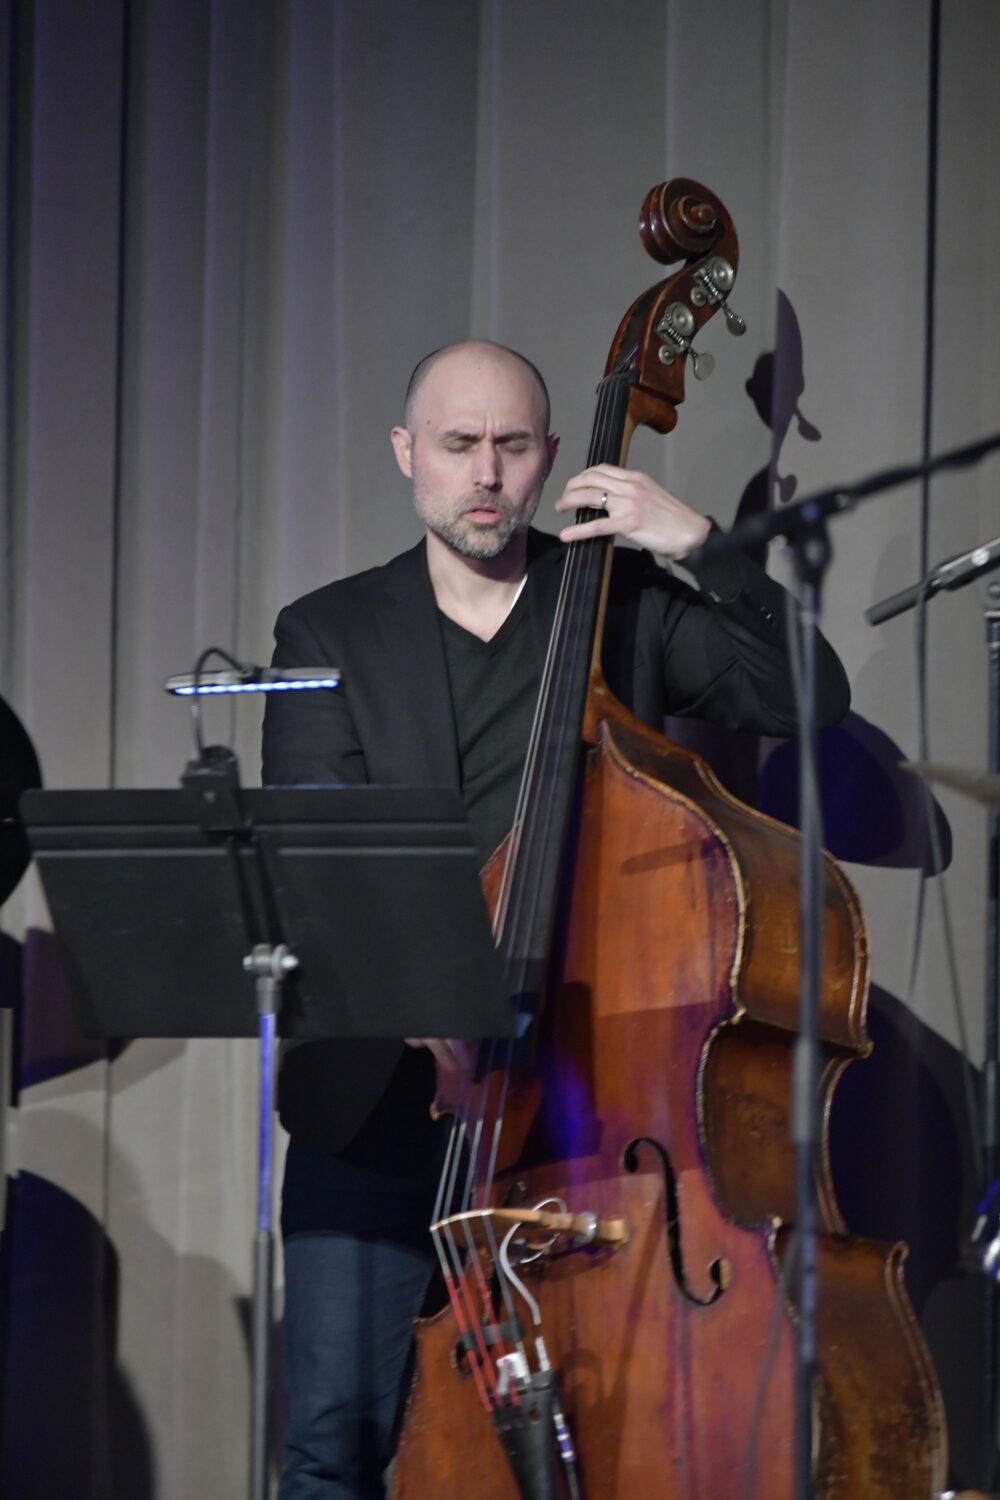 Bassist Peter Brendler with Stacy Dillard at the Southampton Arts Center on February 17.   DANA SHAW